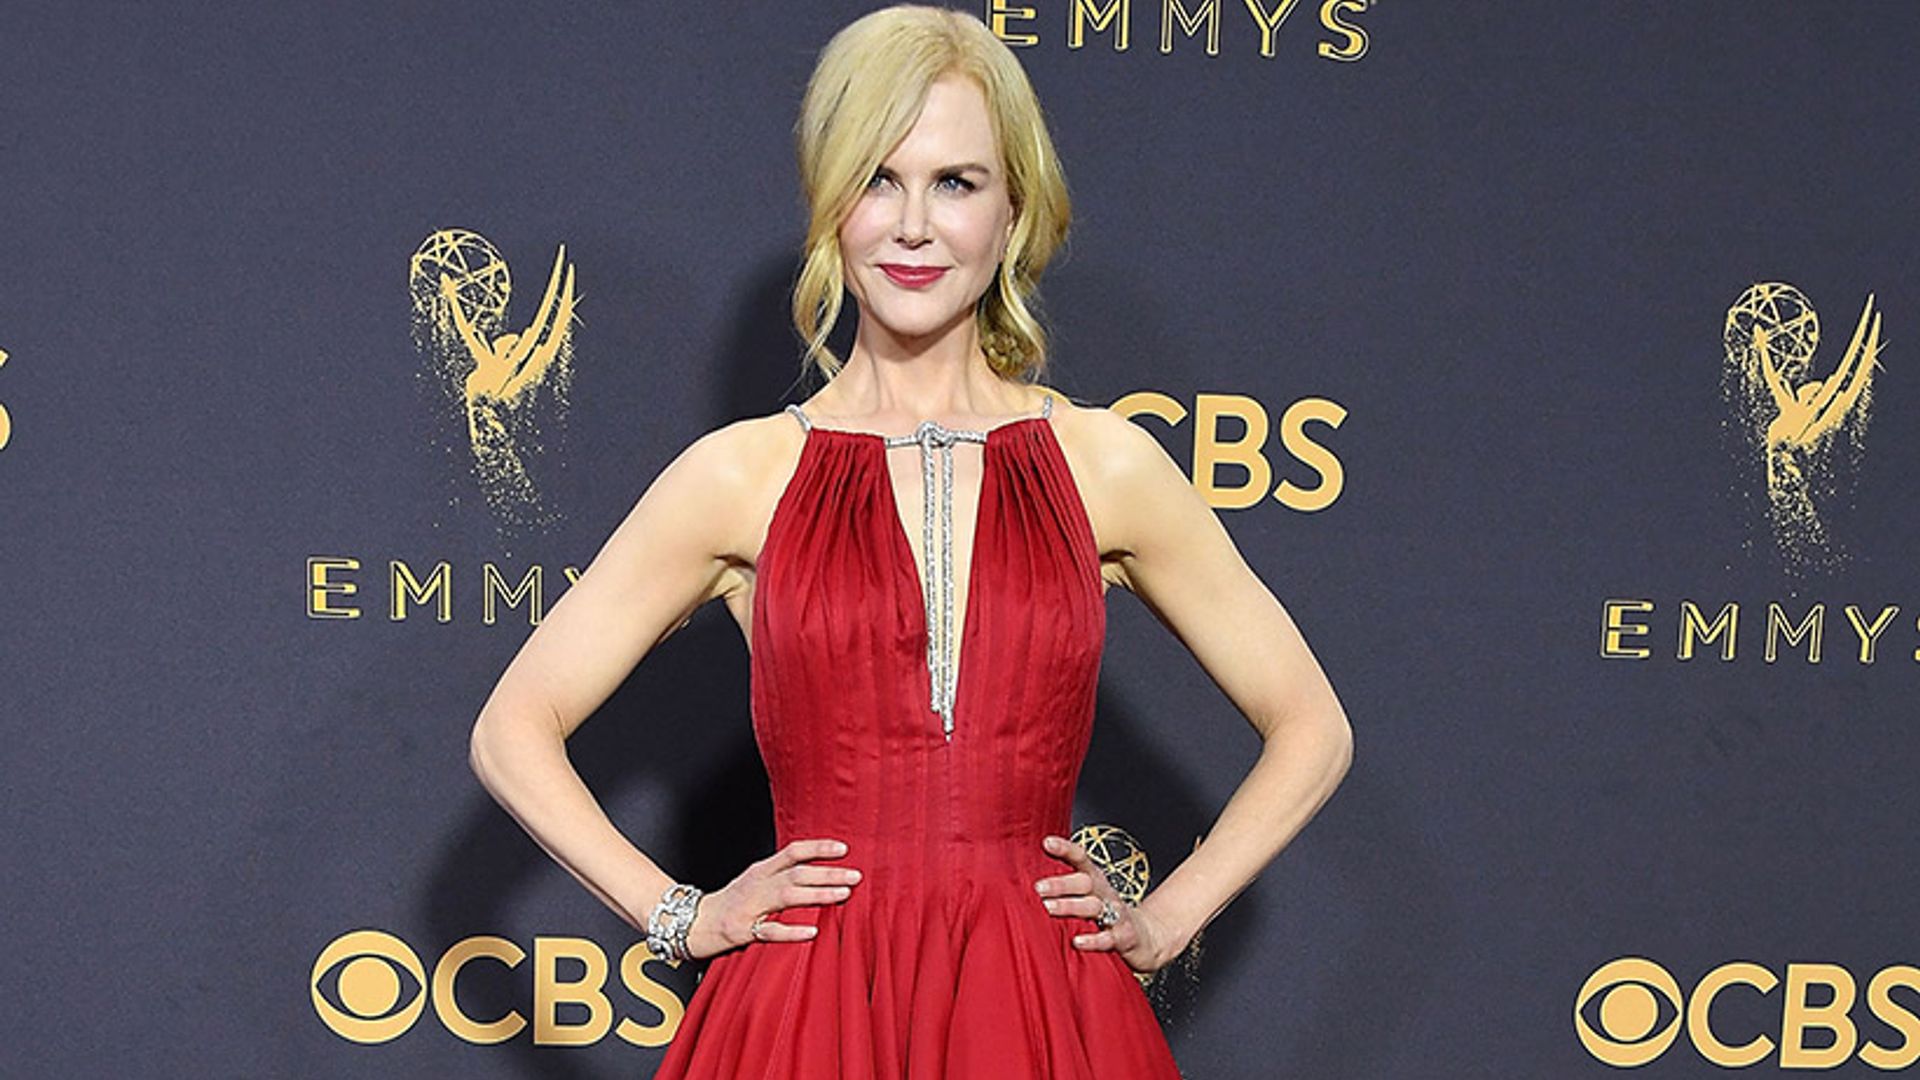 Nicole Kidman reveals she lost interest in fashion after first daughter's birth